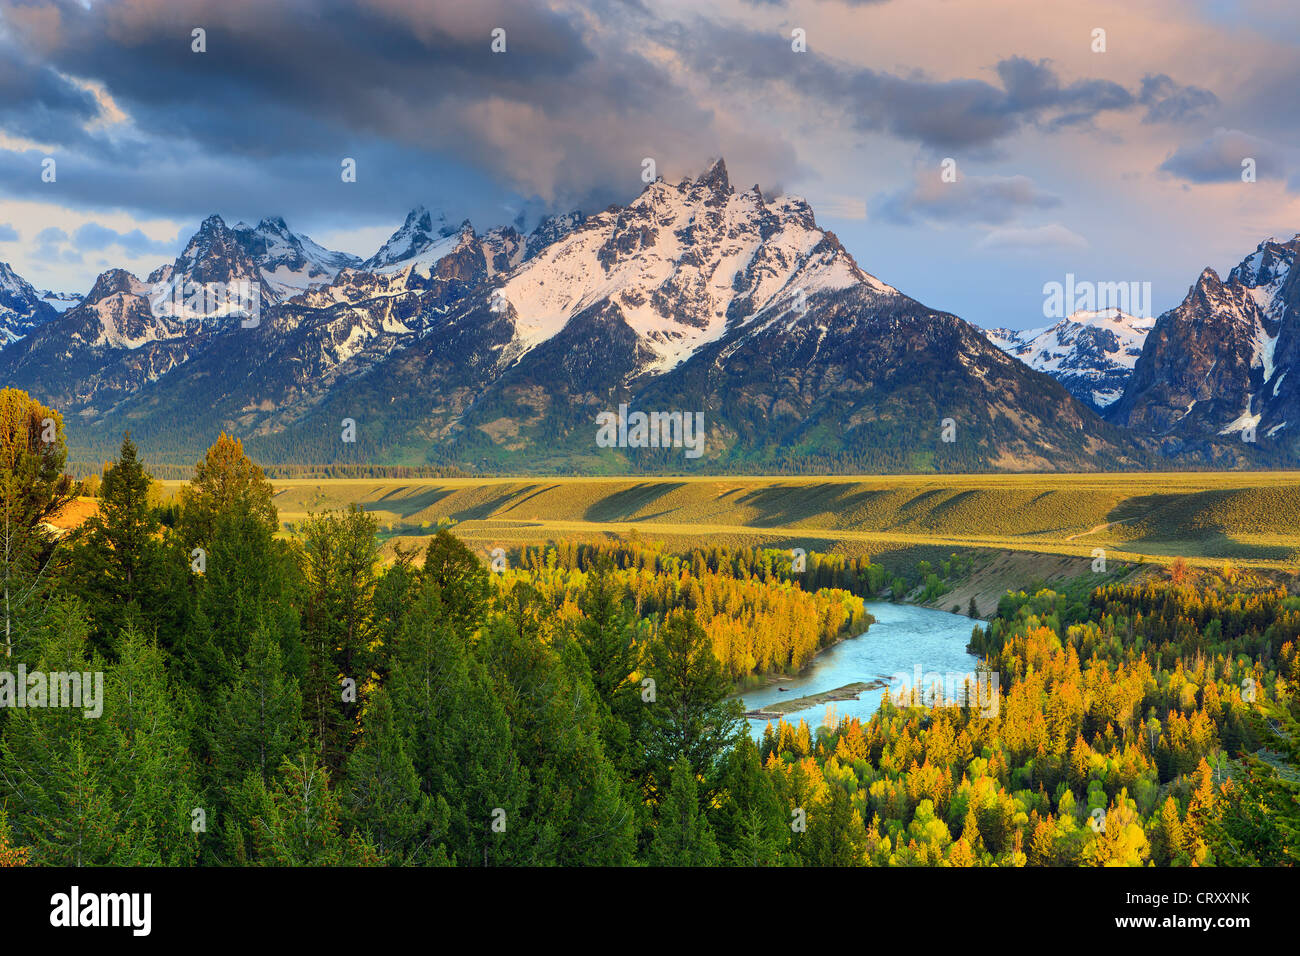 Sunrise at the Snake River Overlook at Grand Teton National Park in Wyoming, USA Stock Photo